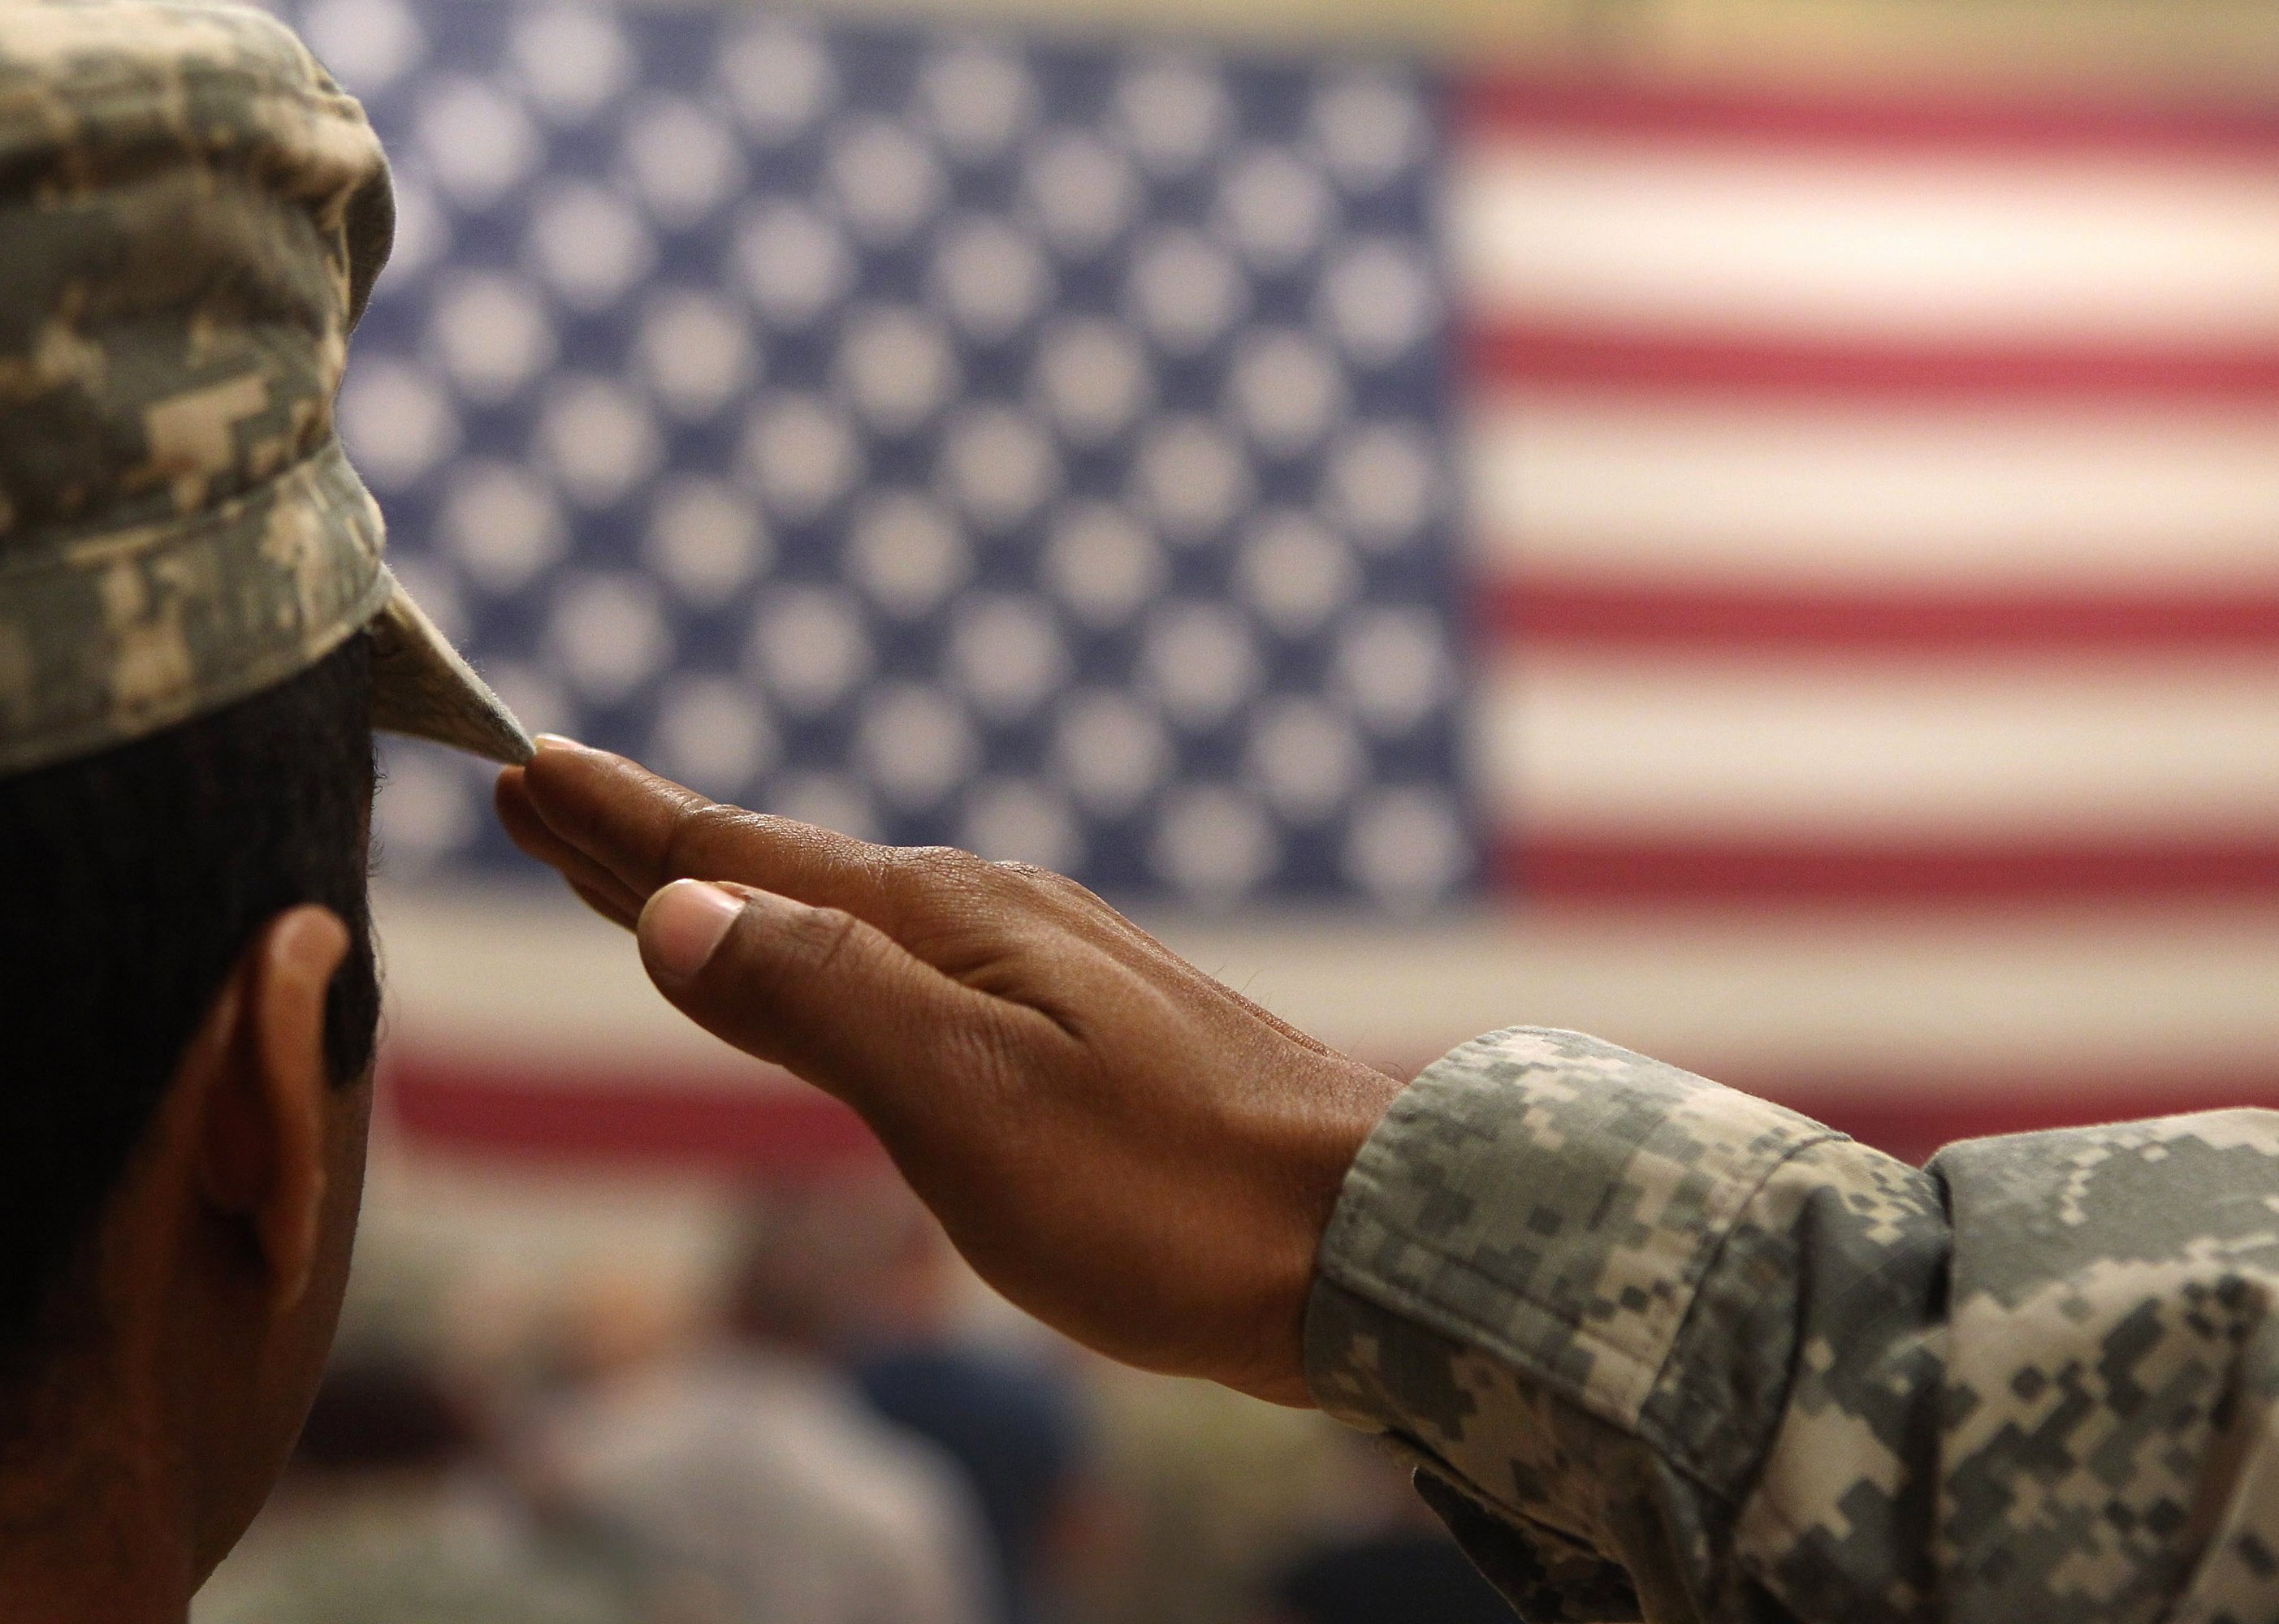  A soldier salutes the flag during a welcome home ceremony for troops arriving from Afghanistan.